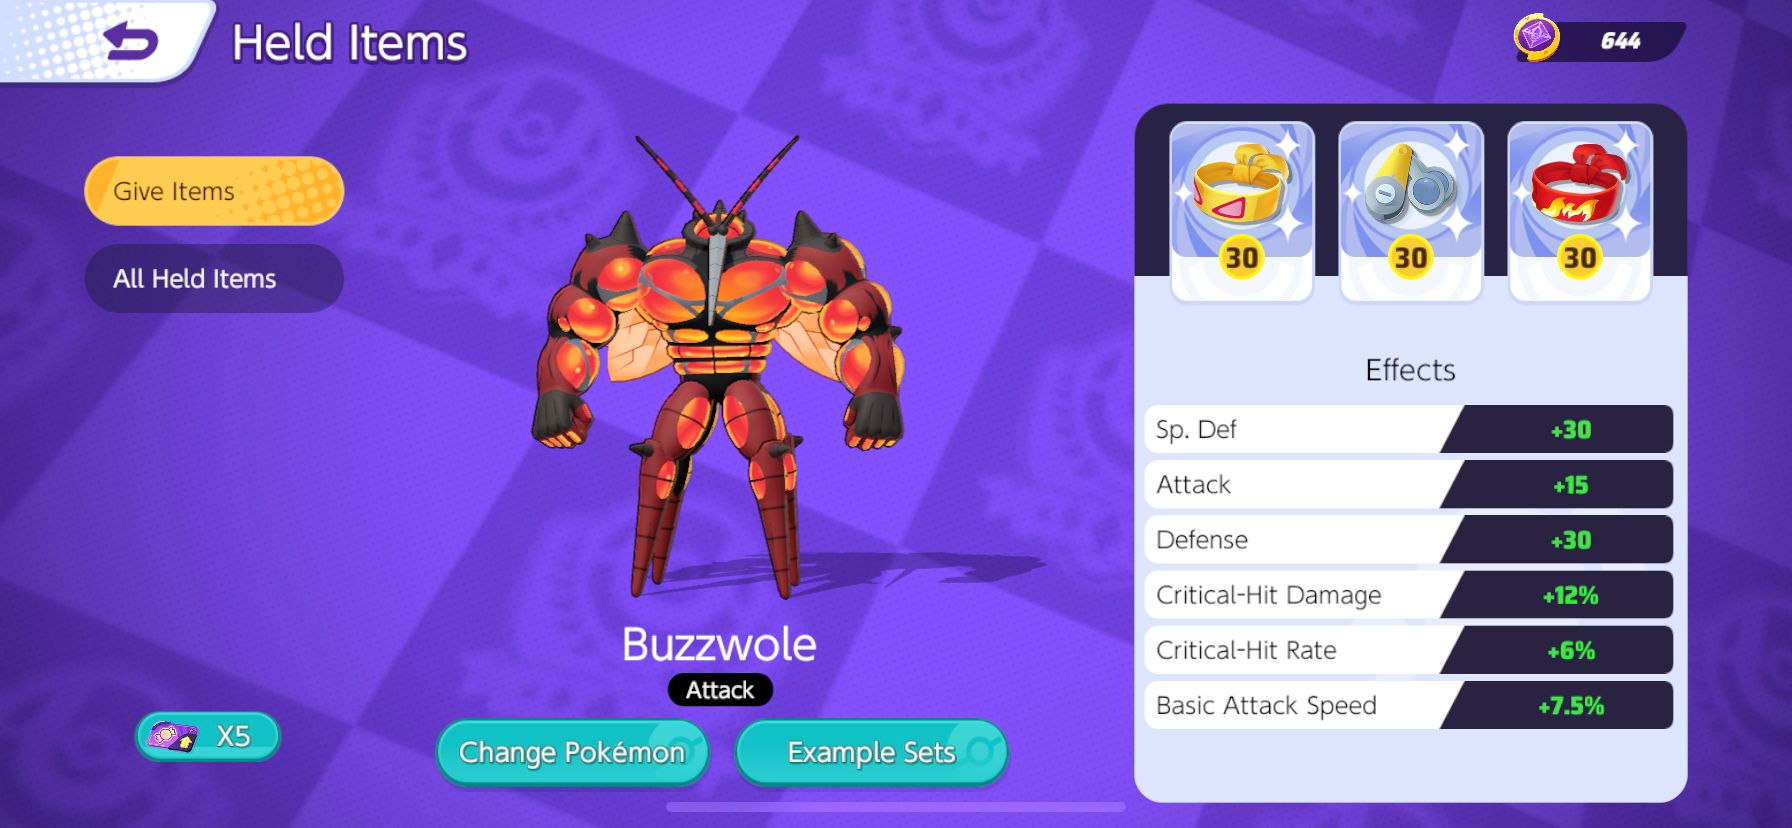 Buzzwole Held Item selection screen, with Muscle Band, Scope Lens, and Focus Band Selected